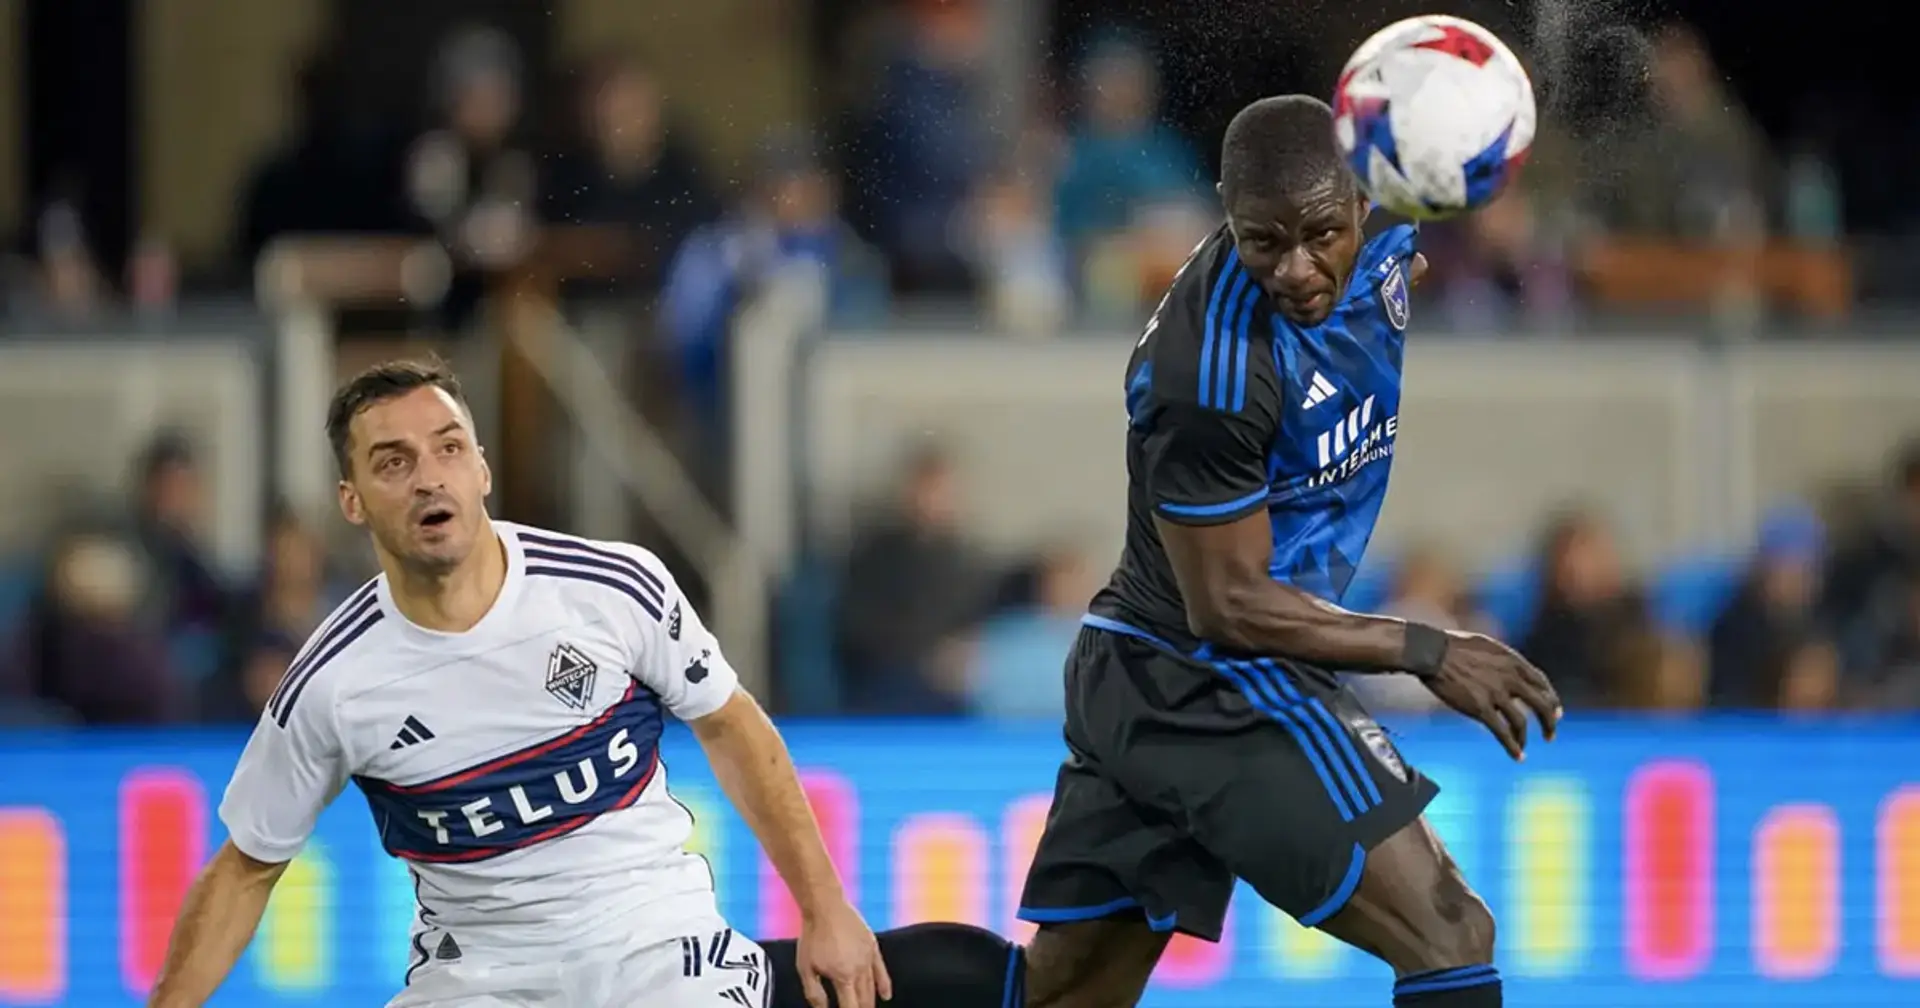 San Jose Earthquakes vs Vancouver Whitecaps: Predictions, team news, odds and best tips